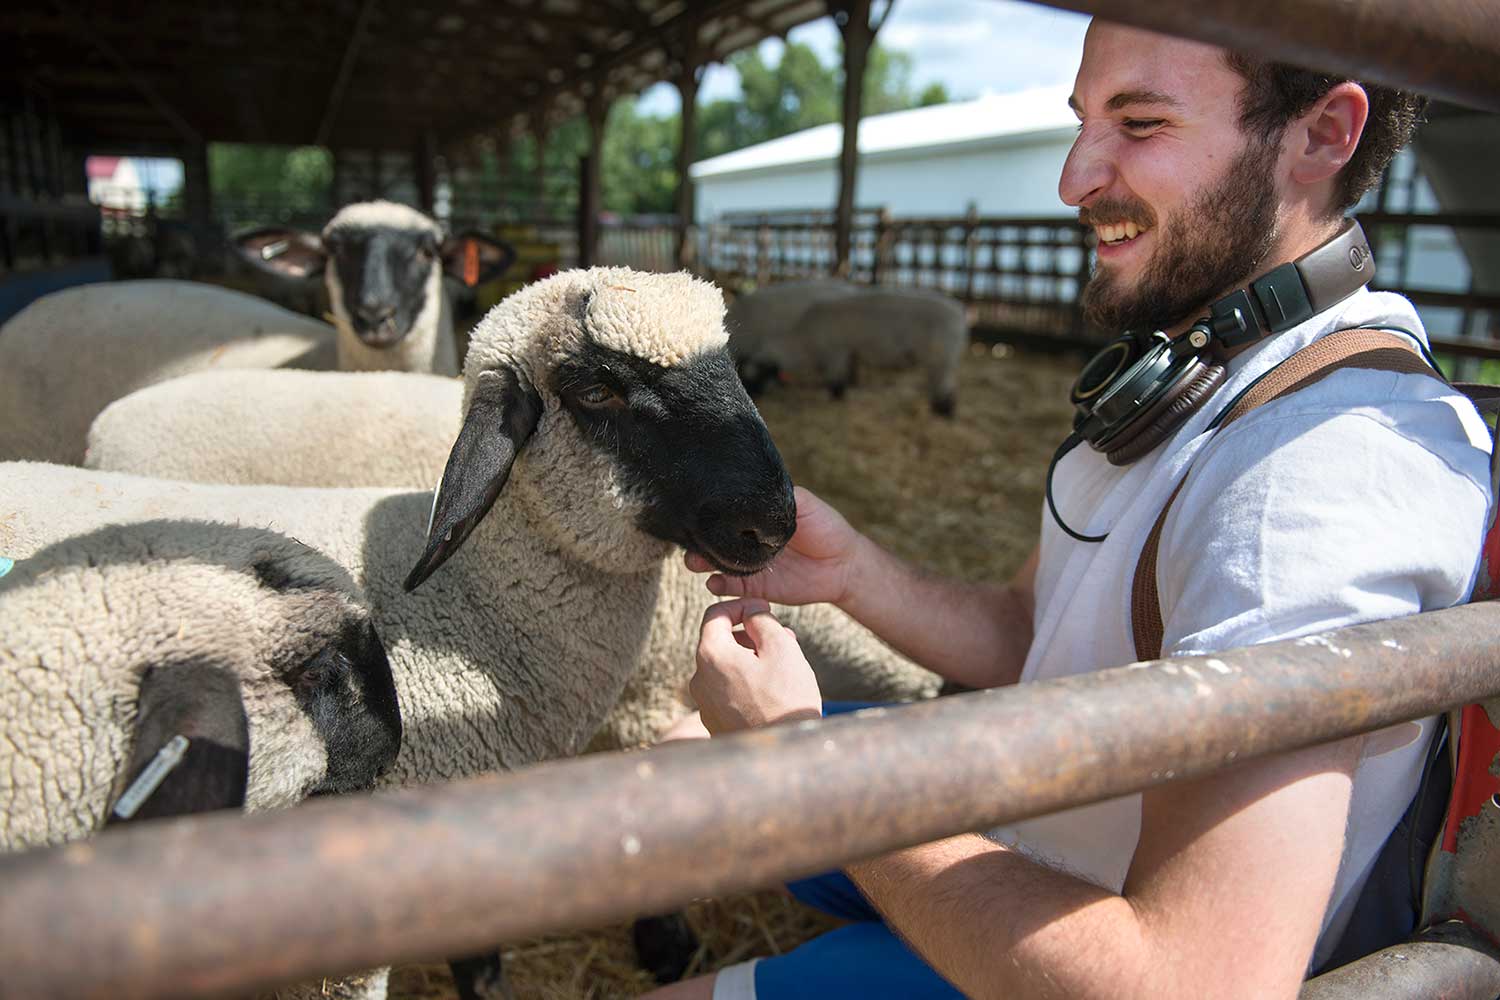 Student smiles while interacting with sheep on campus